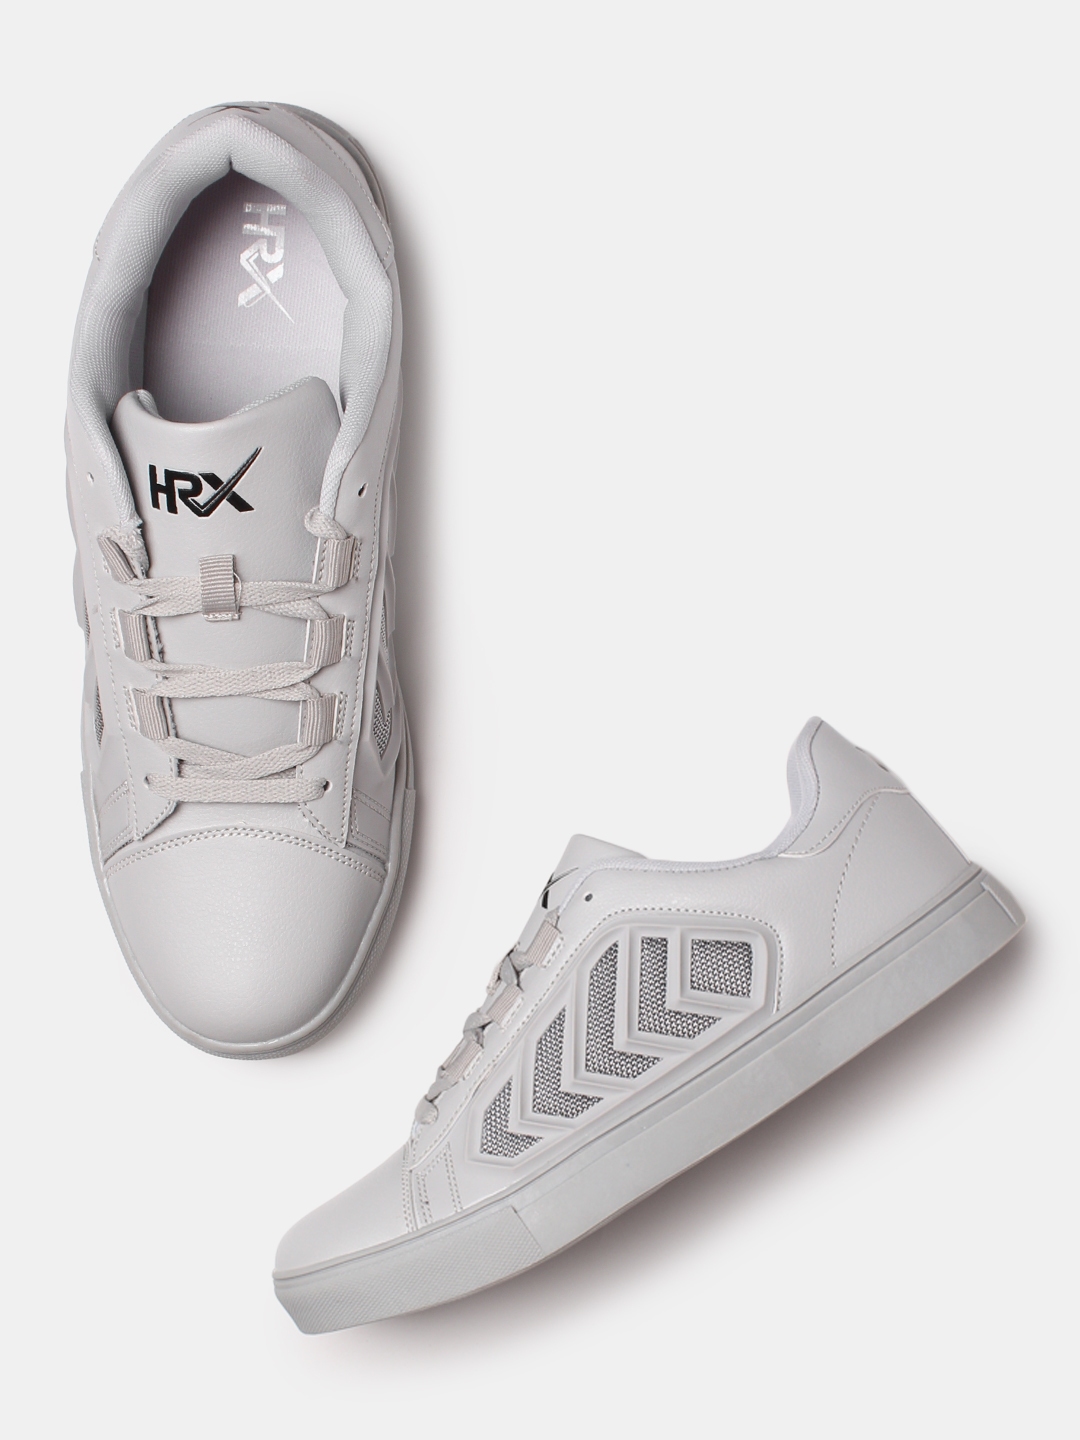 hrx casual shoes myntra